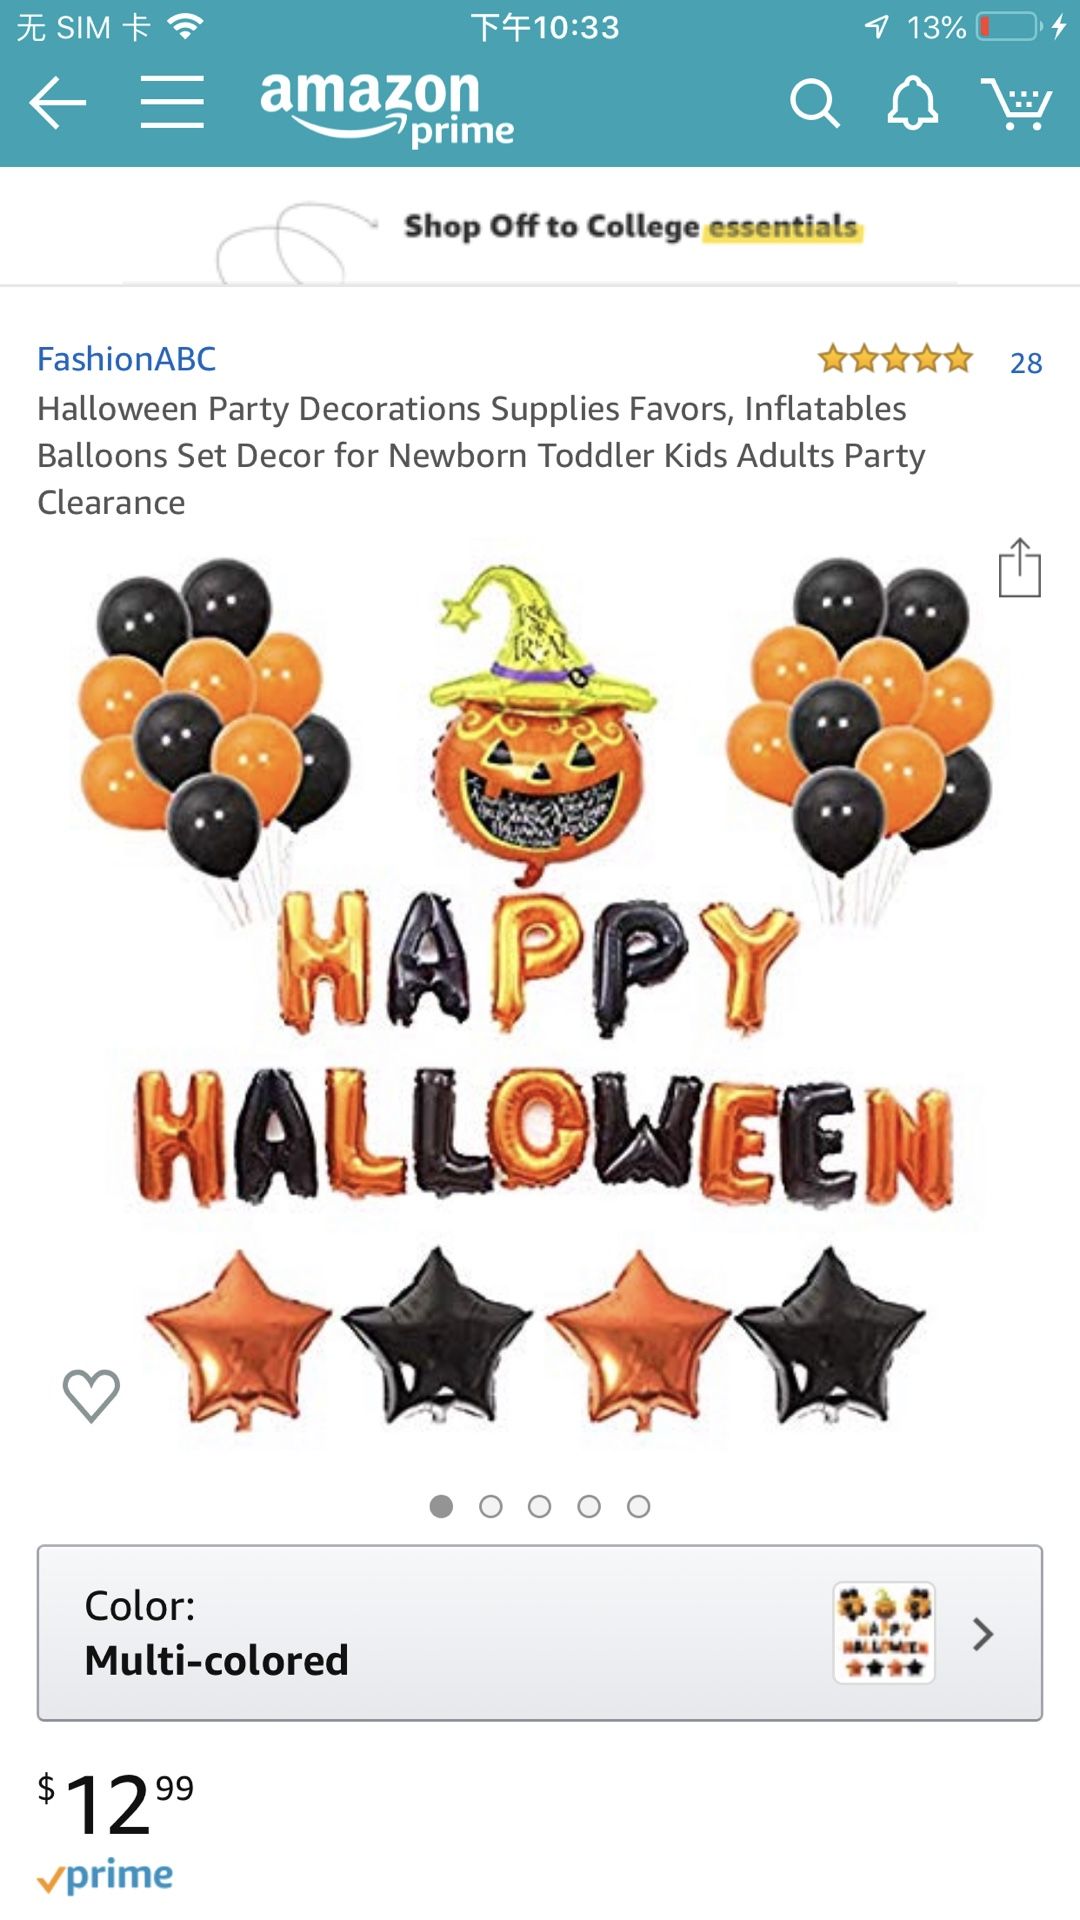 Brand new Halloween Party Decorations Supplies